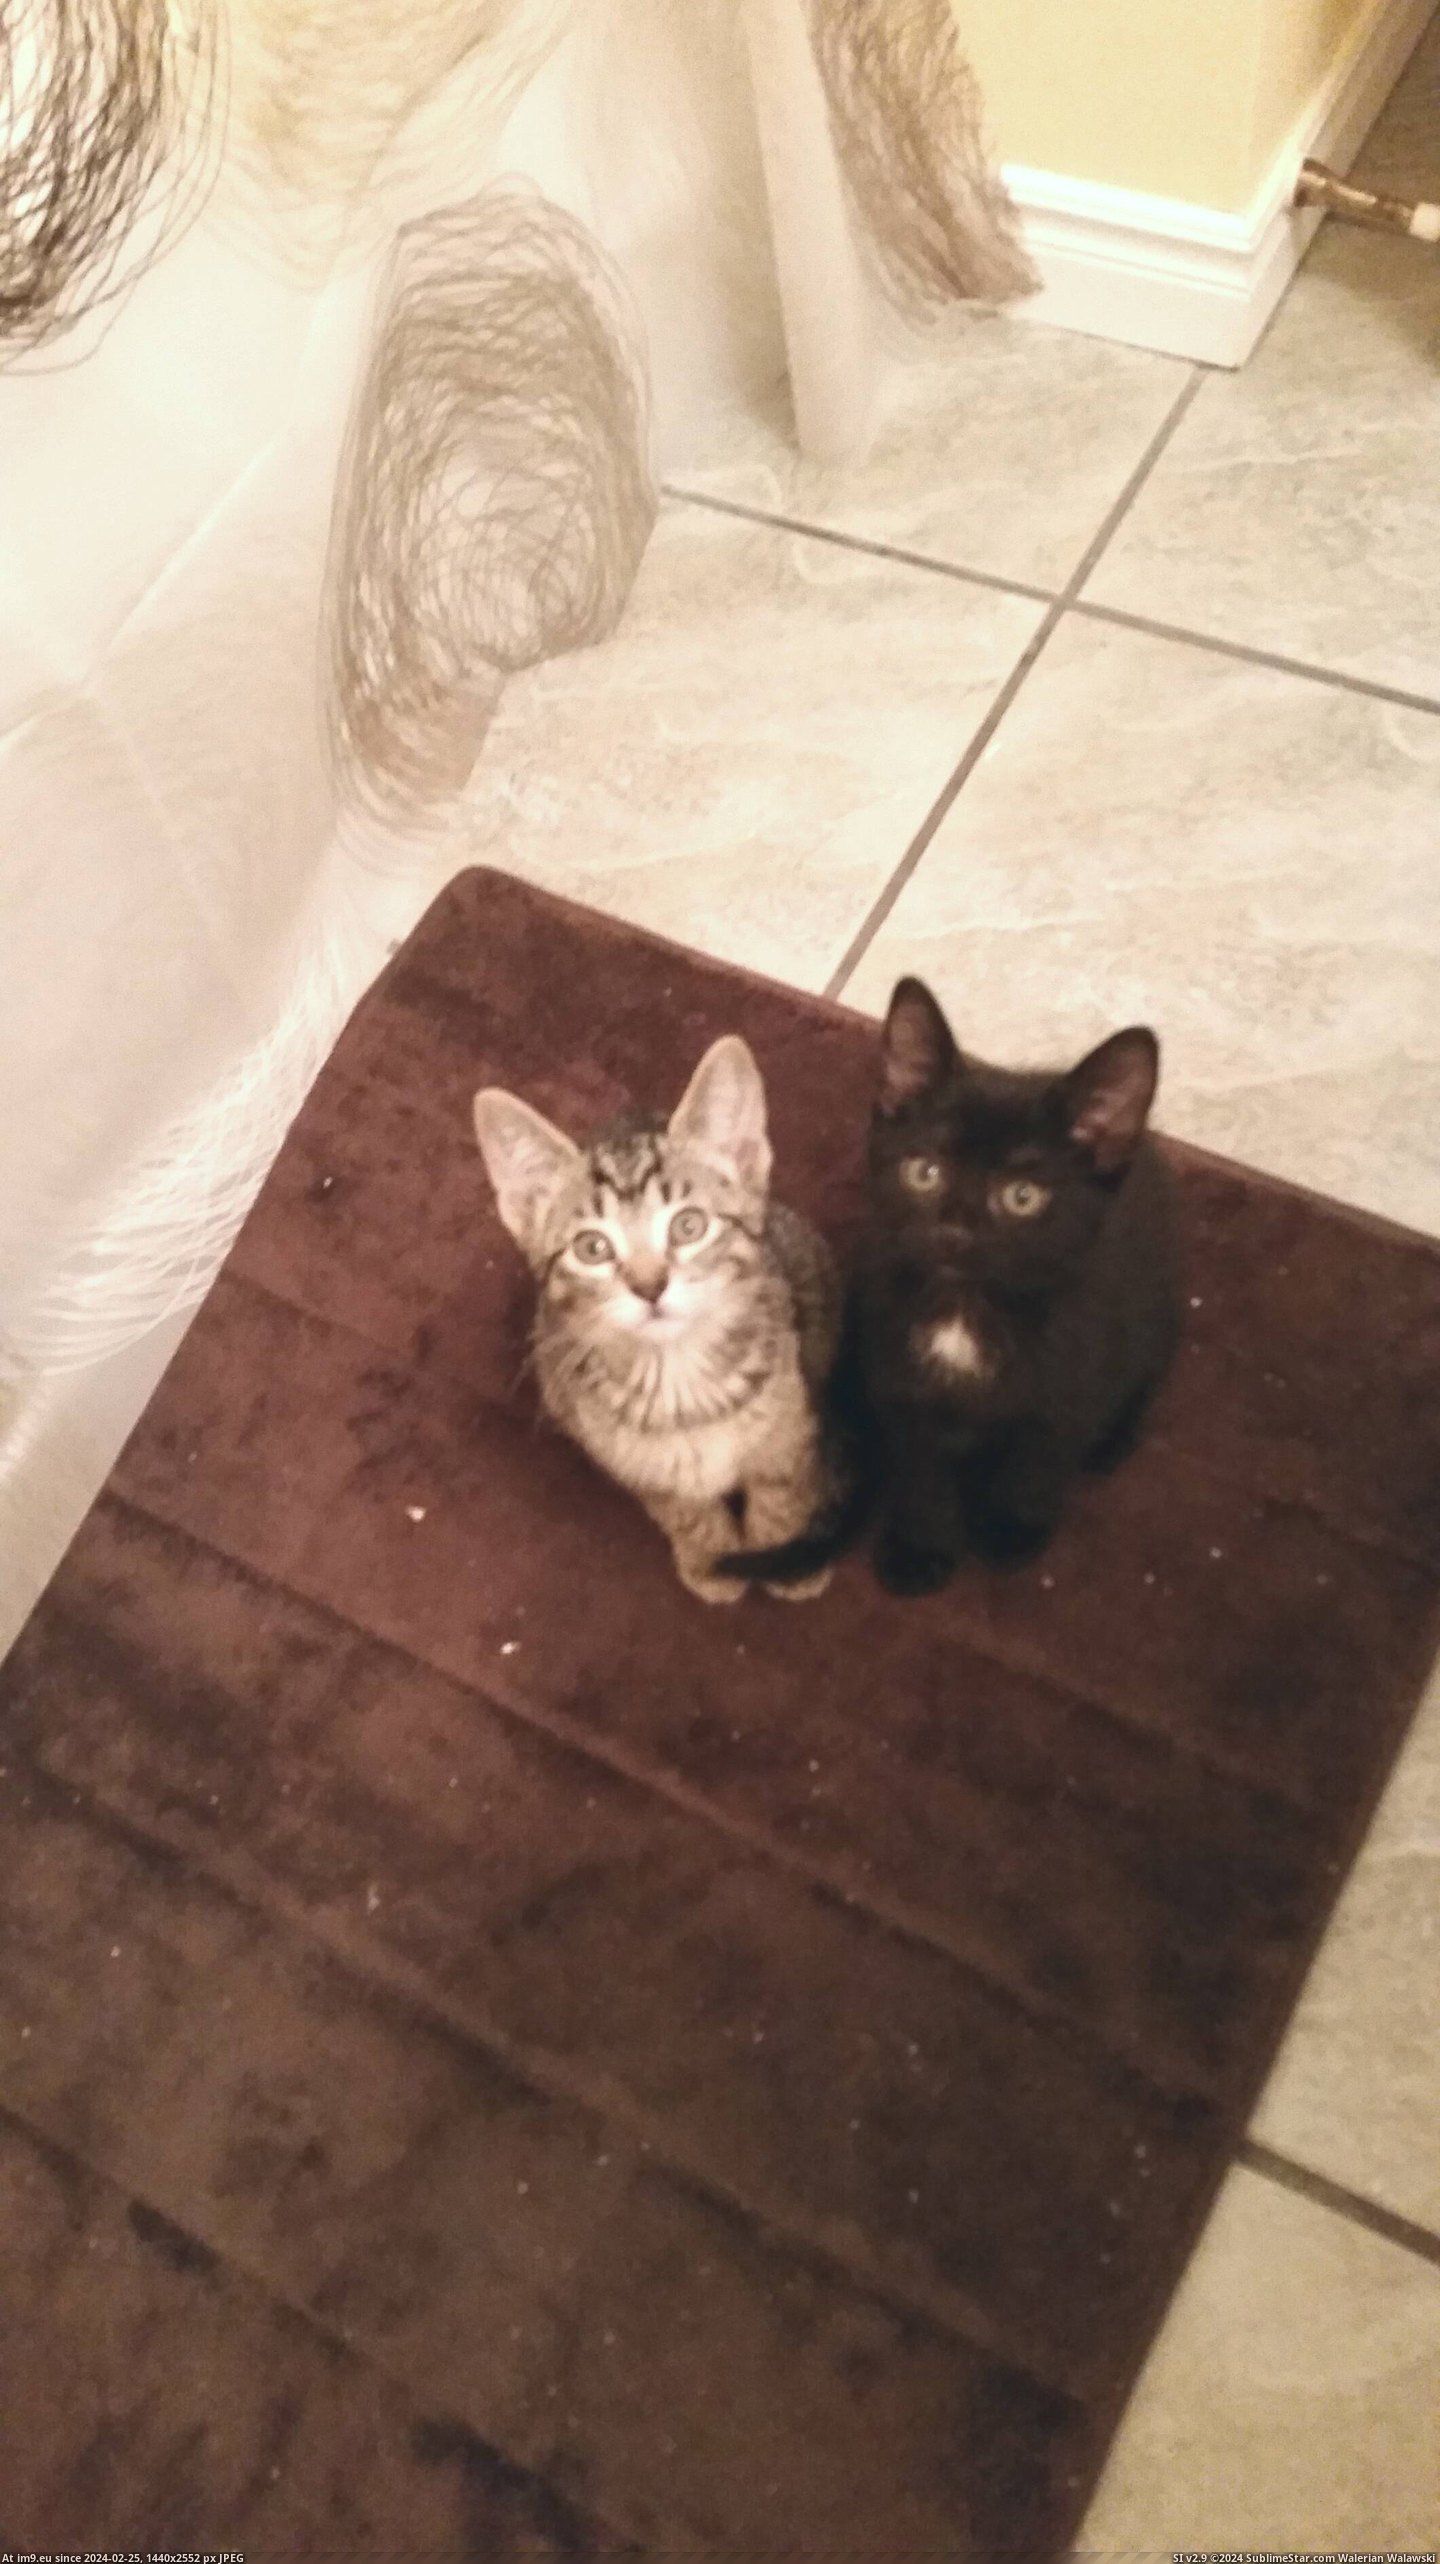 #Cats #Time #Shower #Curtain #Adopting #Pulled #Closed #Watched [Cats] First shower since adopting them yesterday. They watched me the whole time until I pulled the shower curtain closed.. the Pic. (Image of album My r/CATS favs))